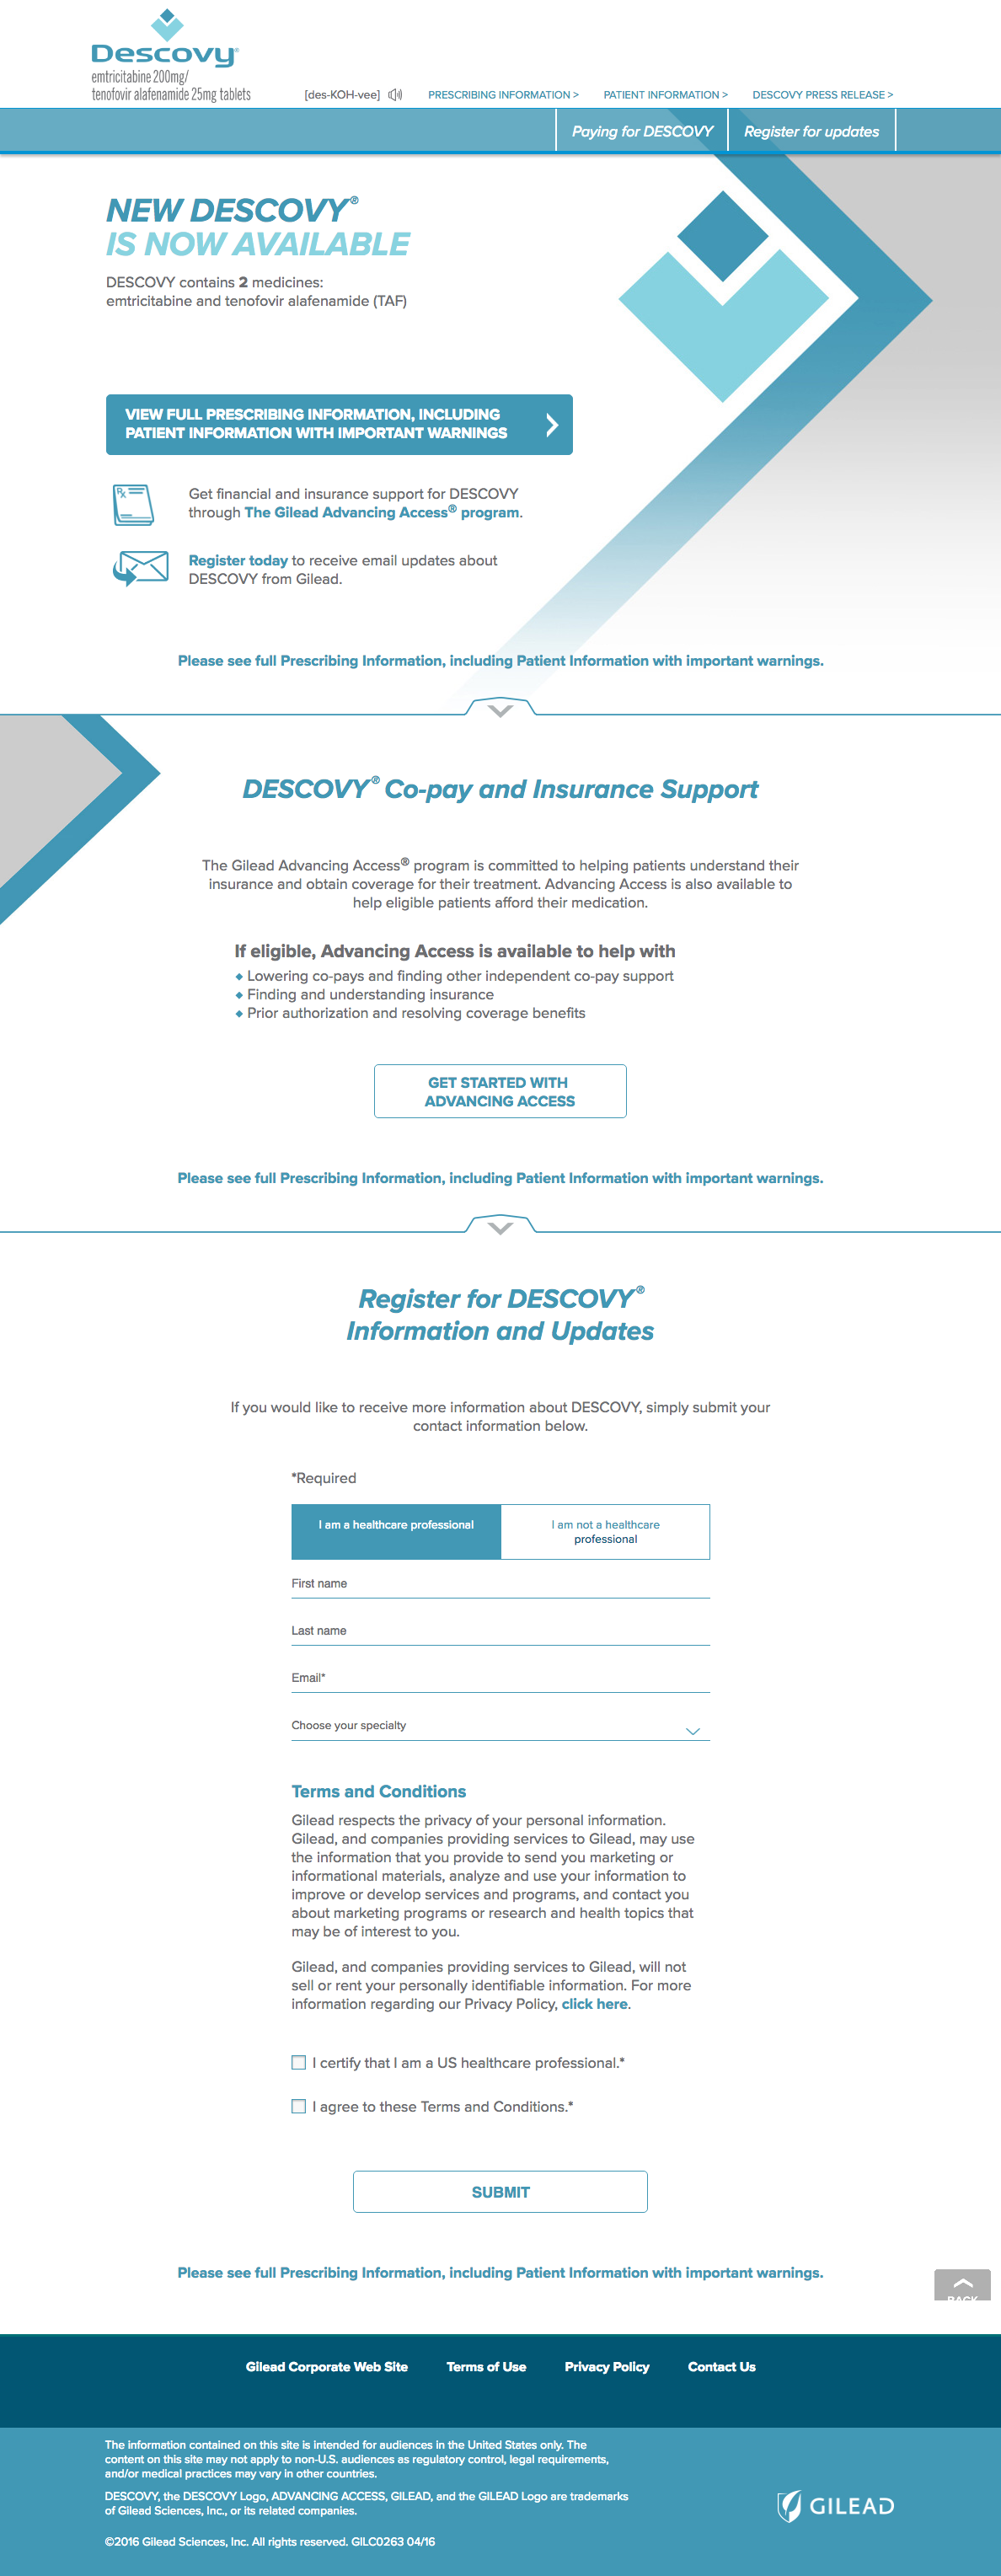 Descovy Now Available Pharma Landing Page: Homepage